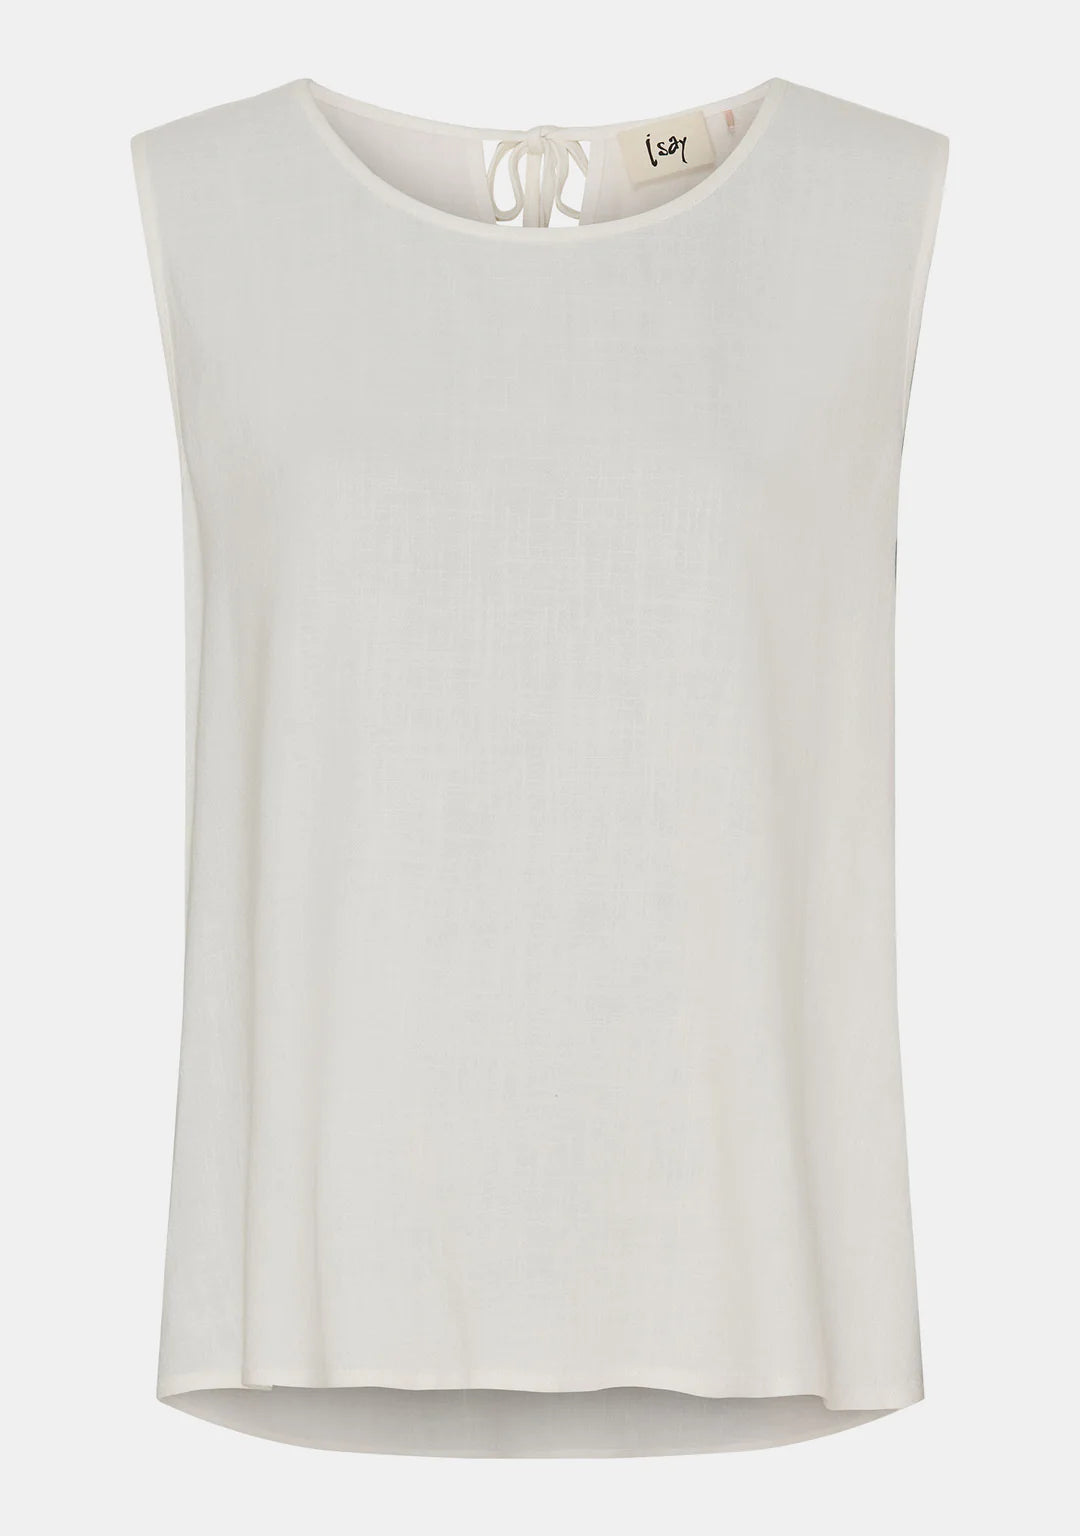 ISAY Pearl Top - Broken White